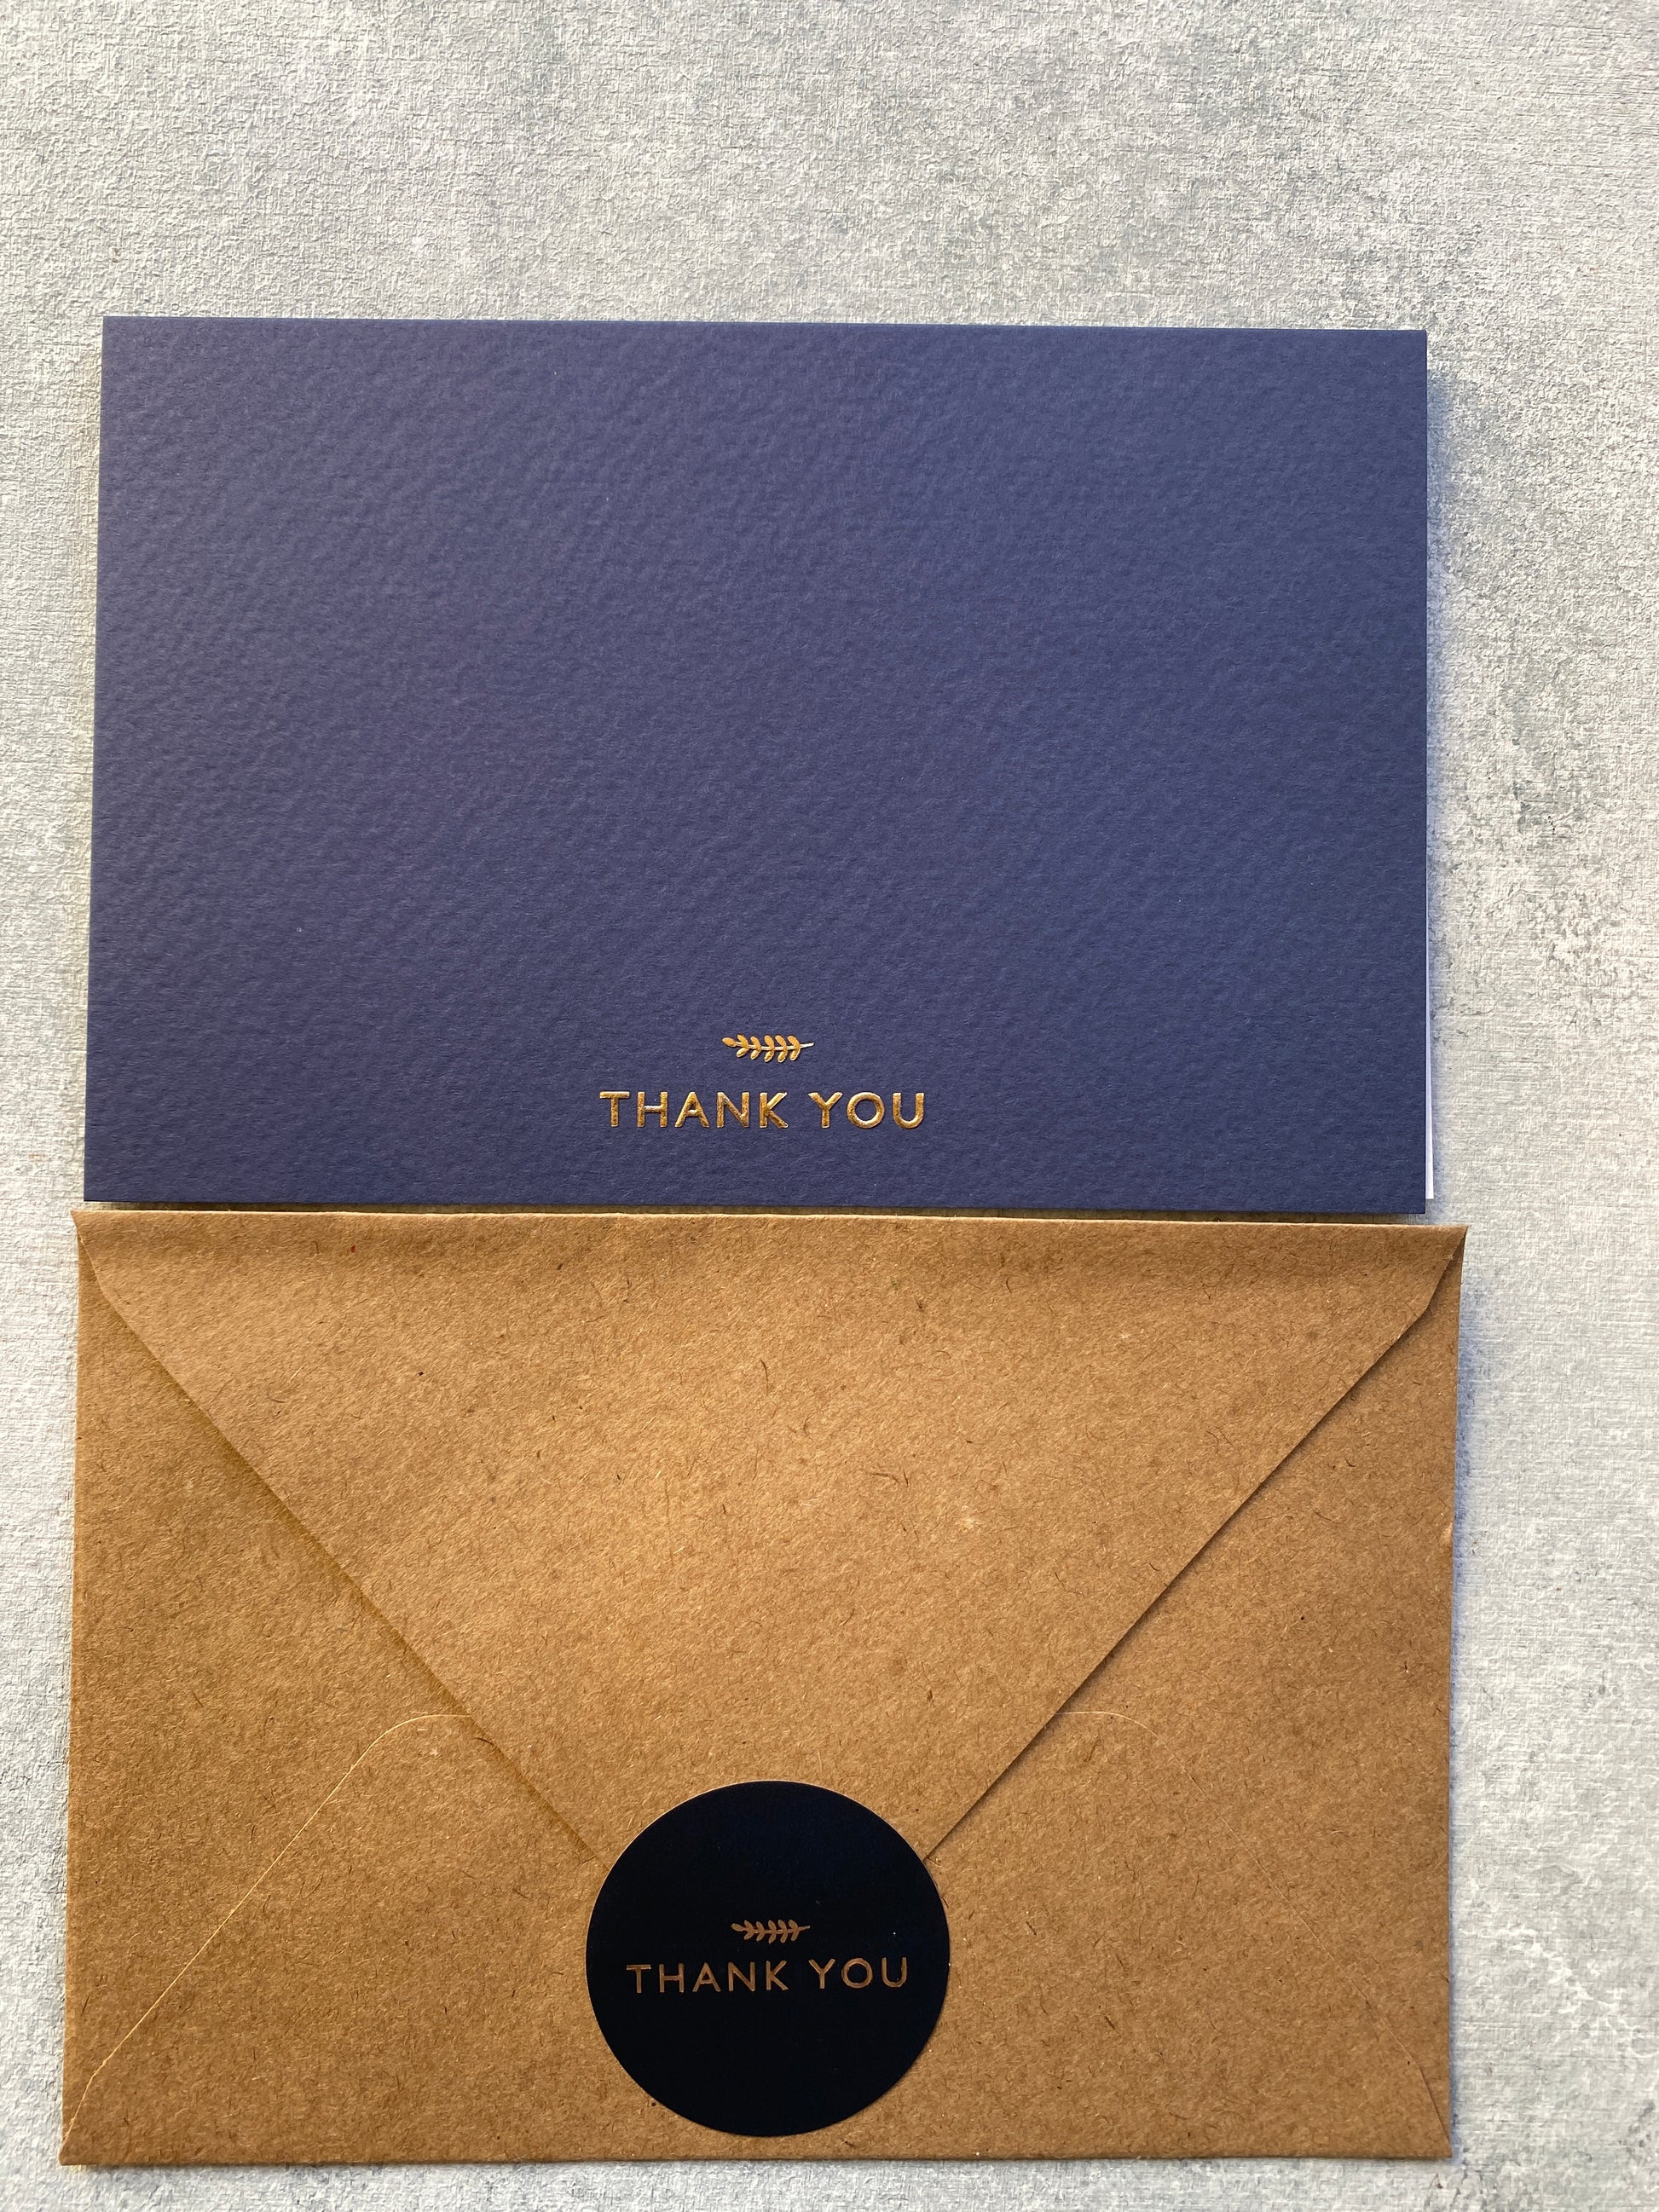  Run2Print (36 Pack) Thank You Cards With Envelopes & Stickers  - Elegant Dusty Blue Emboss Gold Foil Pressed - Blank Notes Wedding,  Bridal, Baby Shower, Business and Formal All Occasion